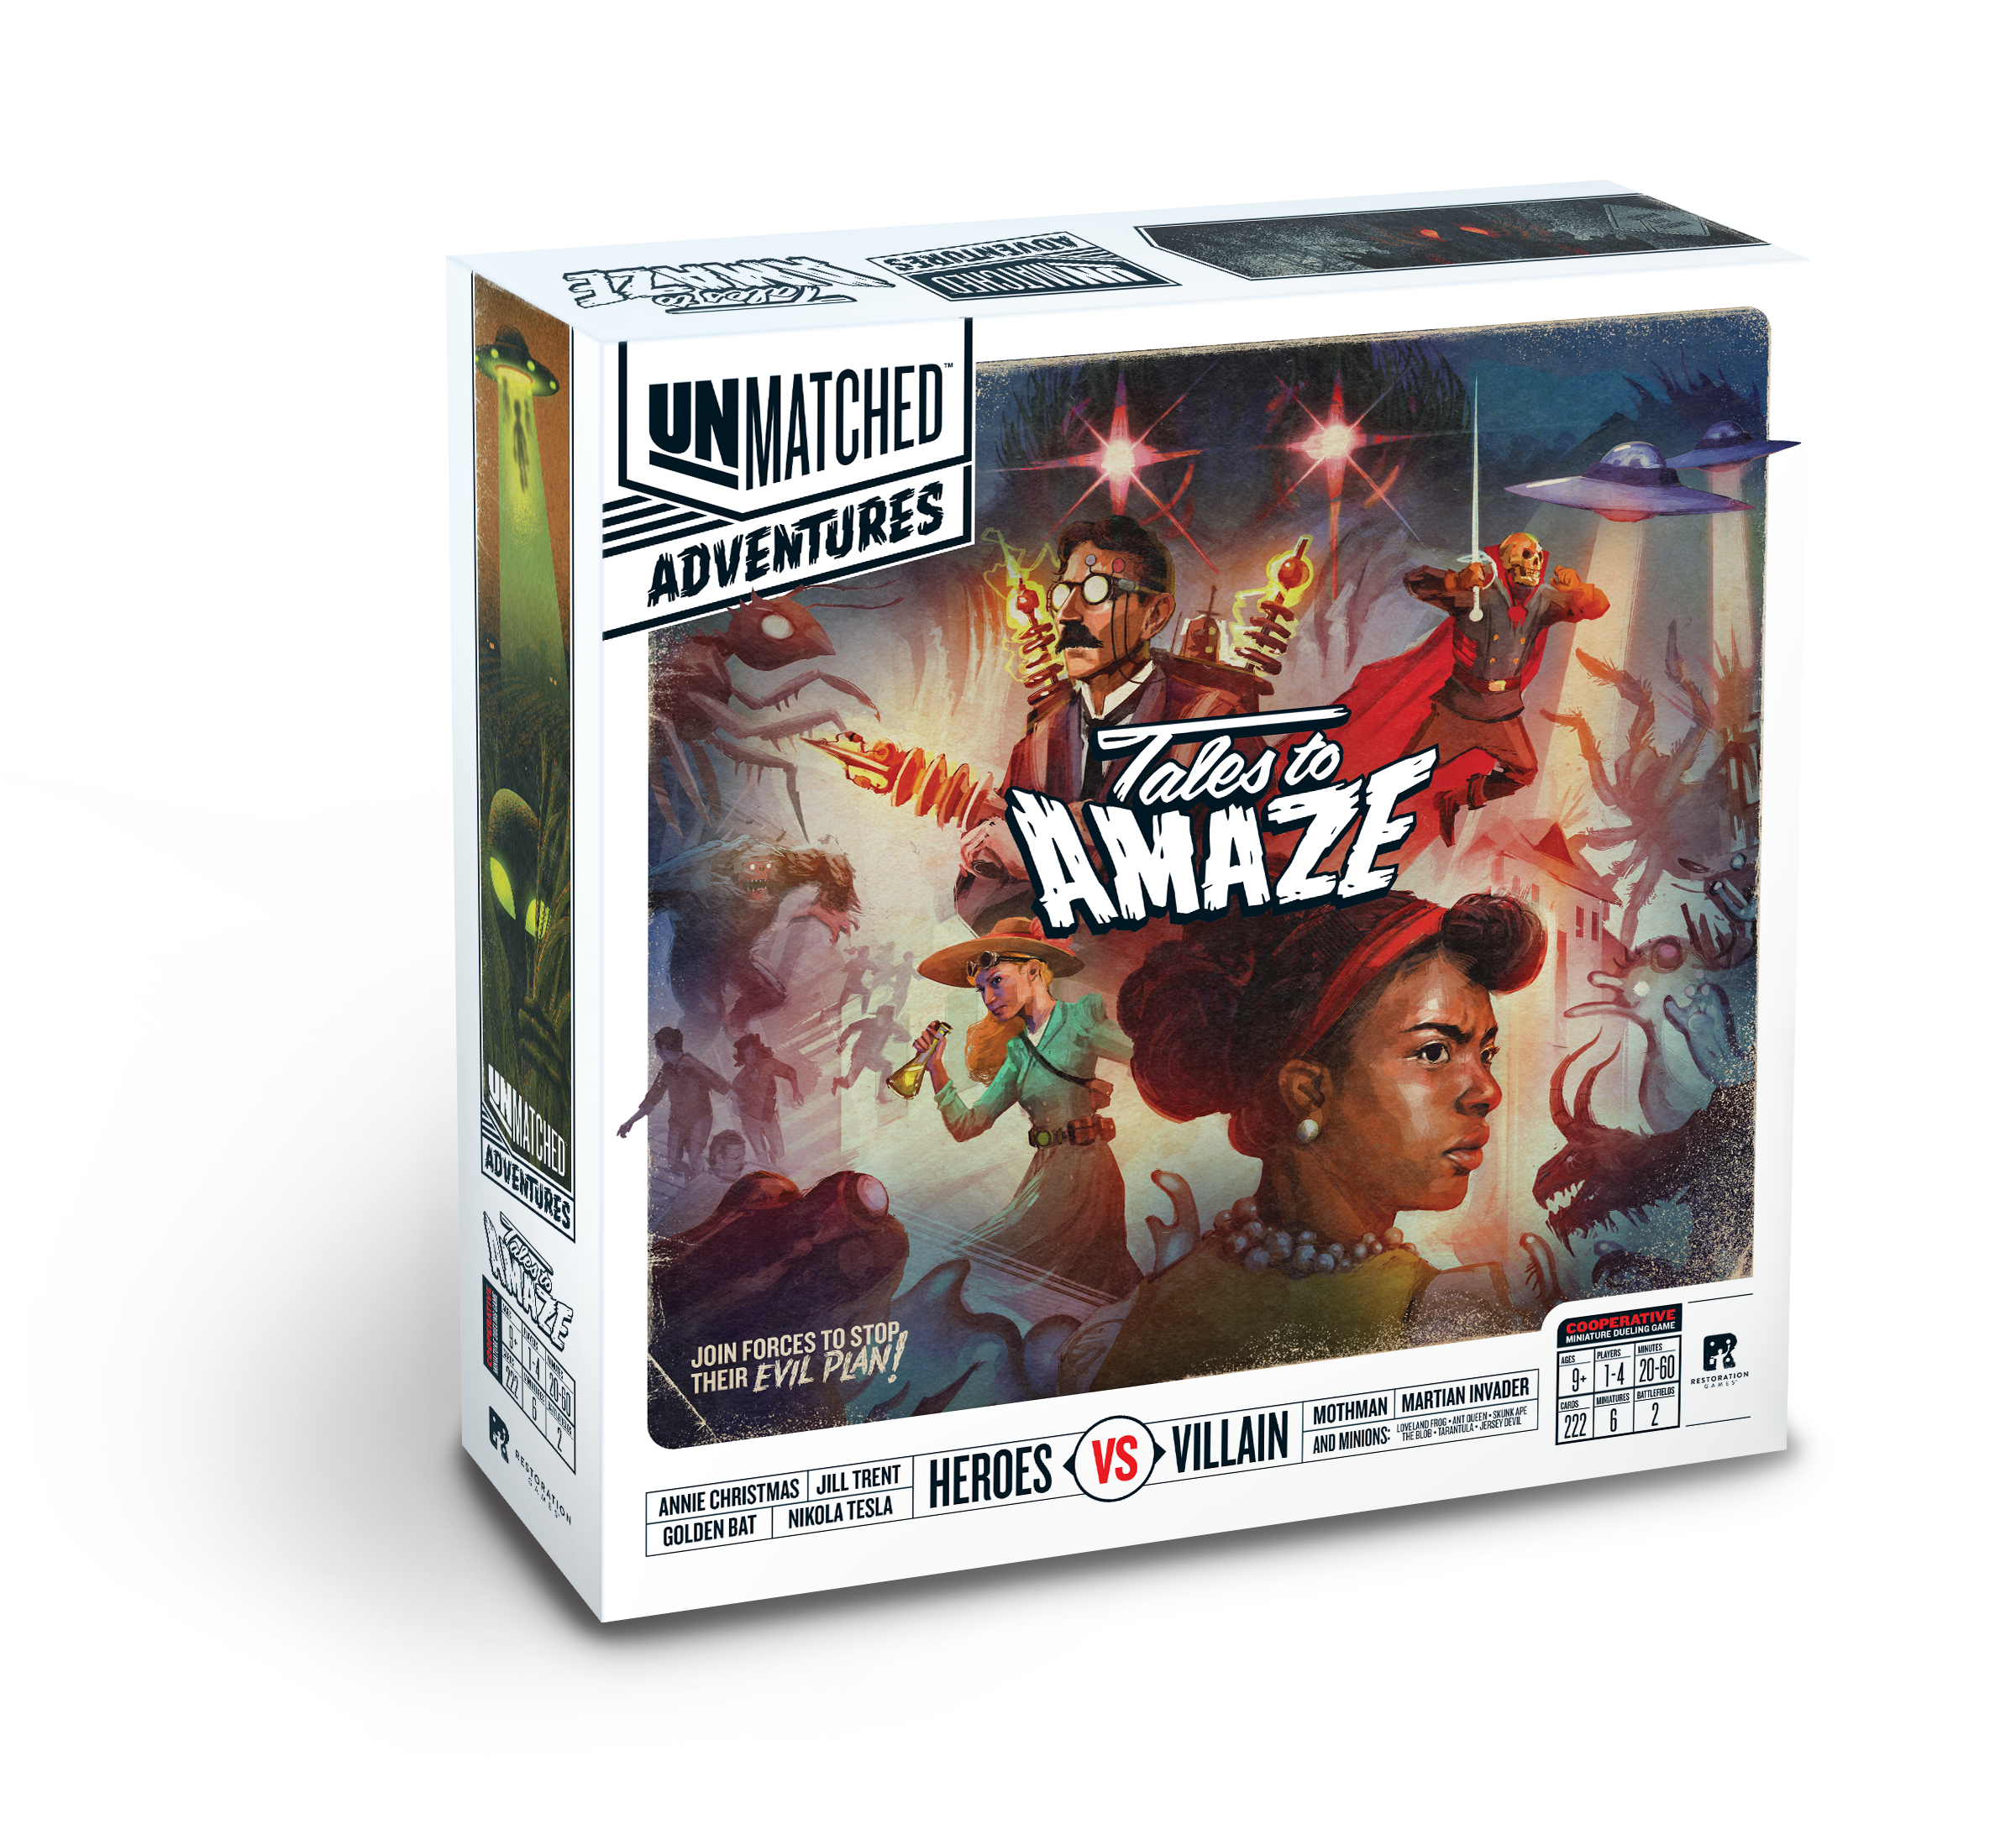 Unmatched Adventures: Tales to amaze | Multizone: Comics And Games